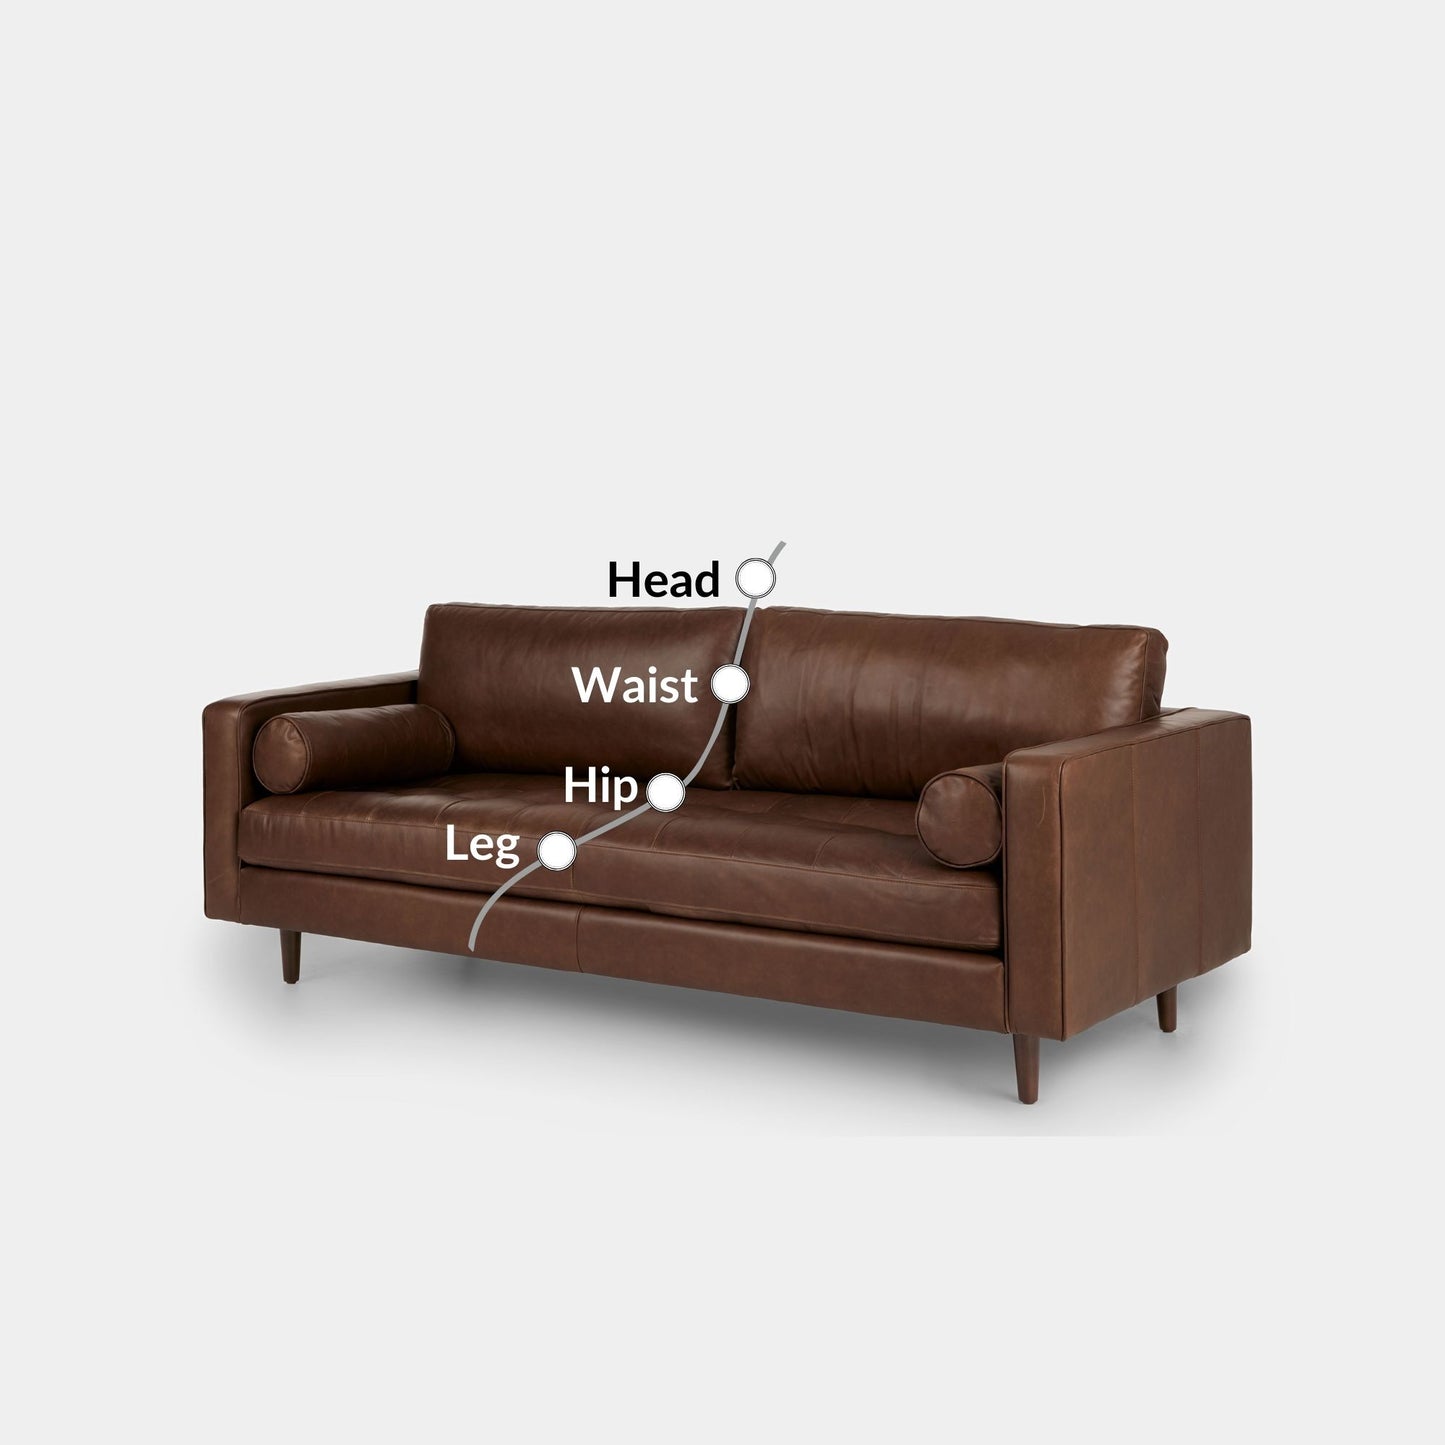 castle brown leather sofa seat comfort